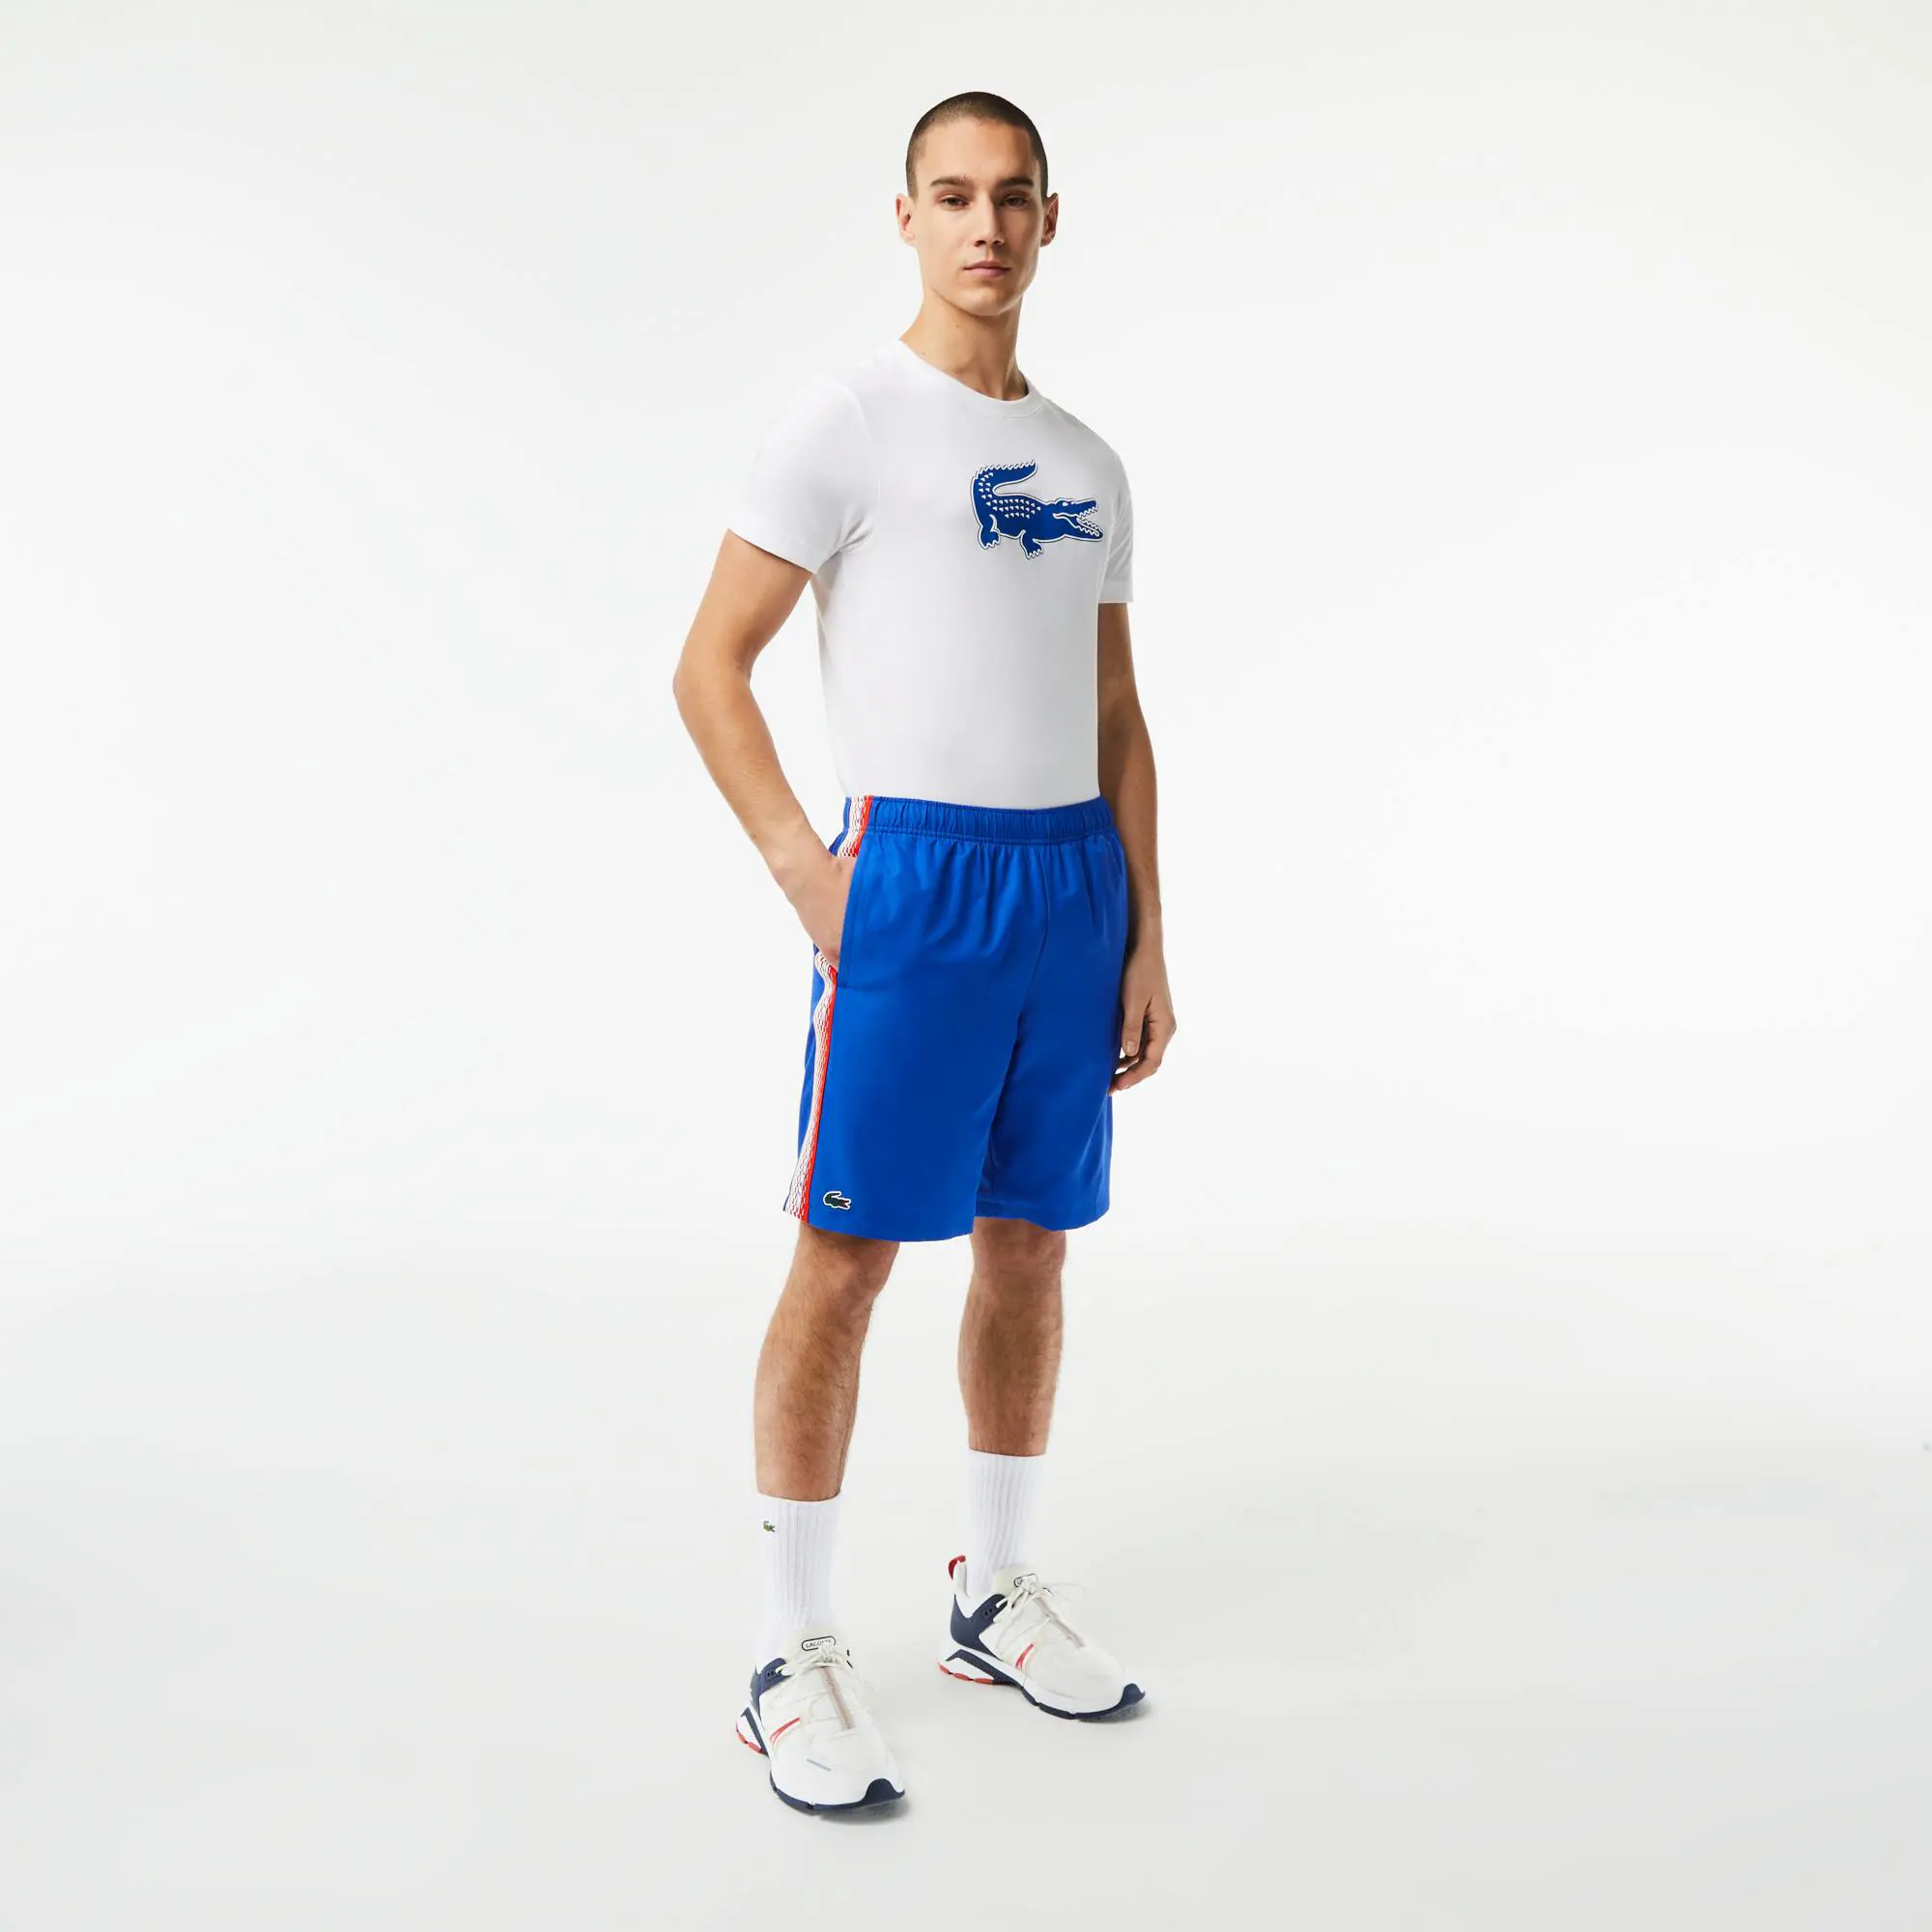 Lacoste Men’s Lacoste Recycled Polyester Tennis Shorts. 1